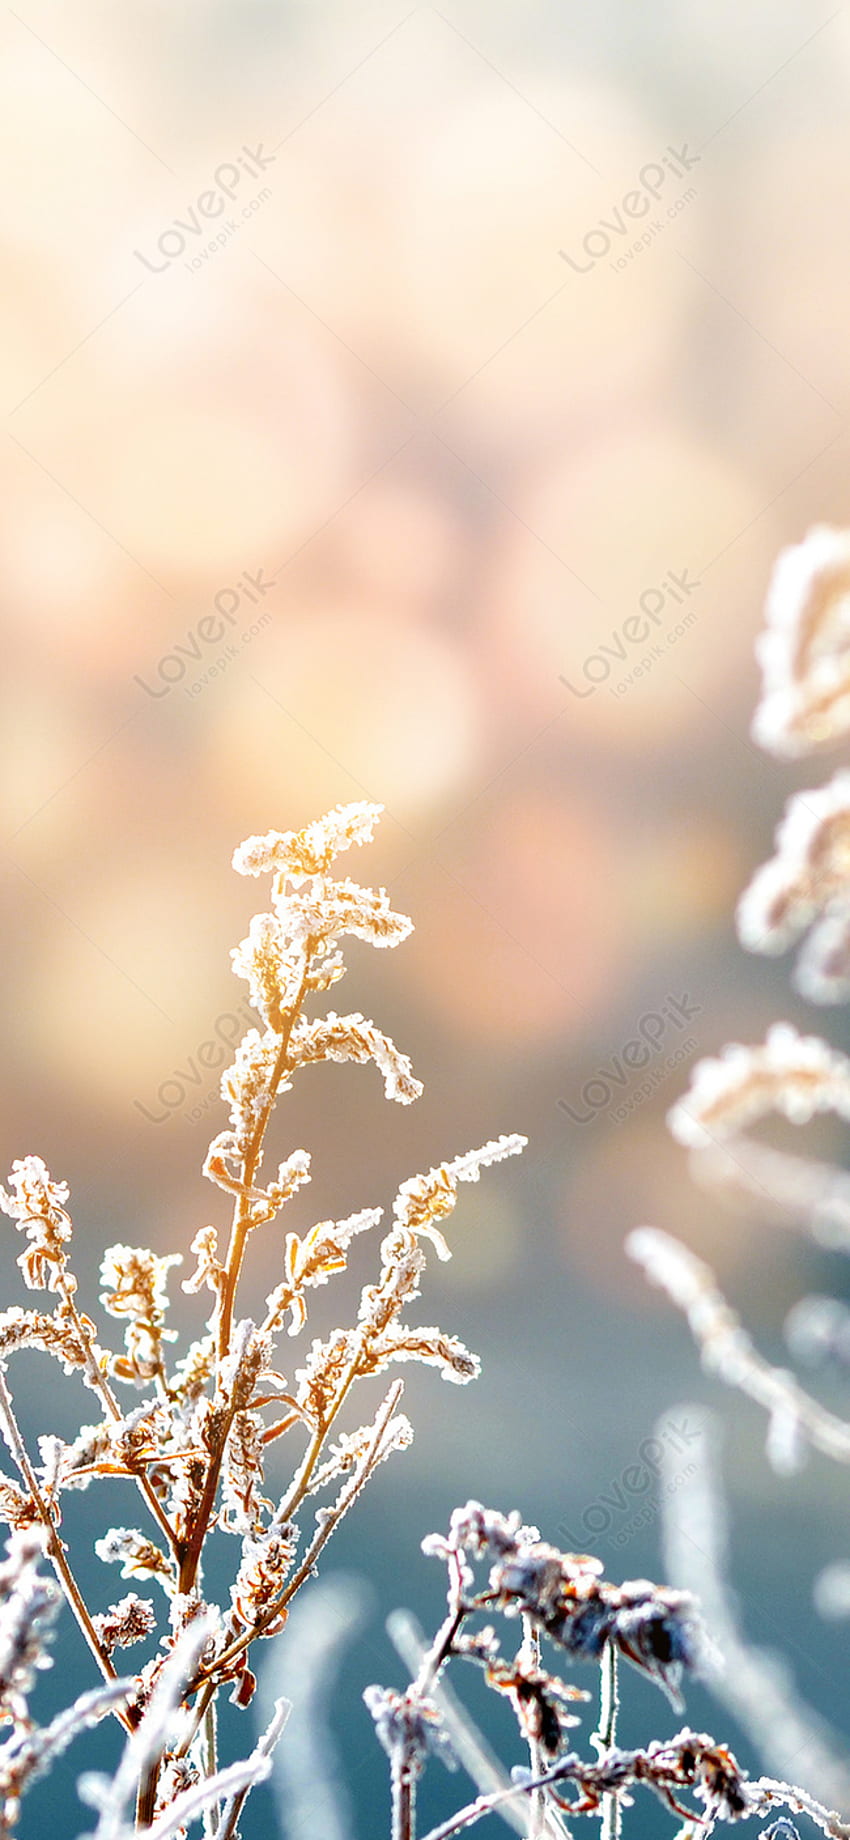 Winter Plant Cell Phone Background on Lovepik, Winter Flower iPhone HD phone wallpaper